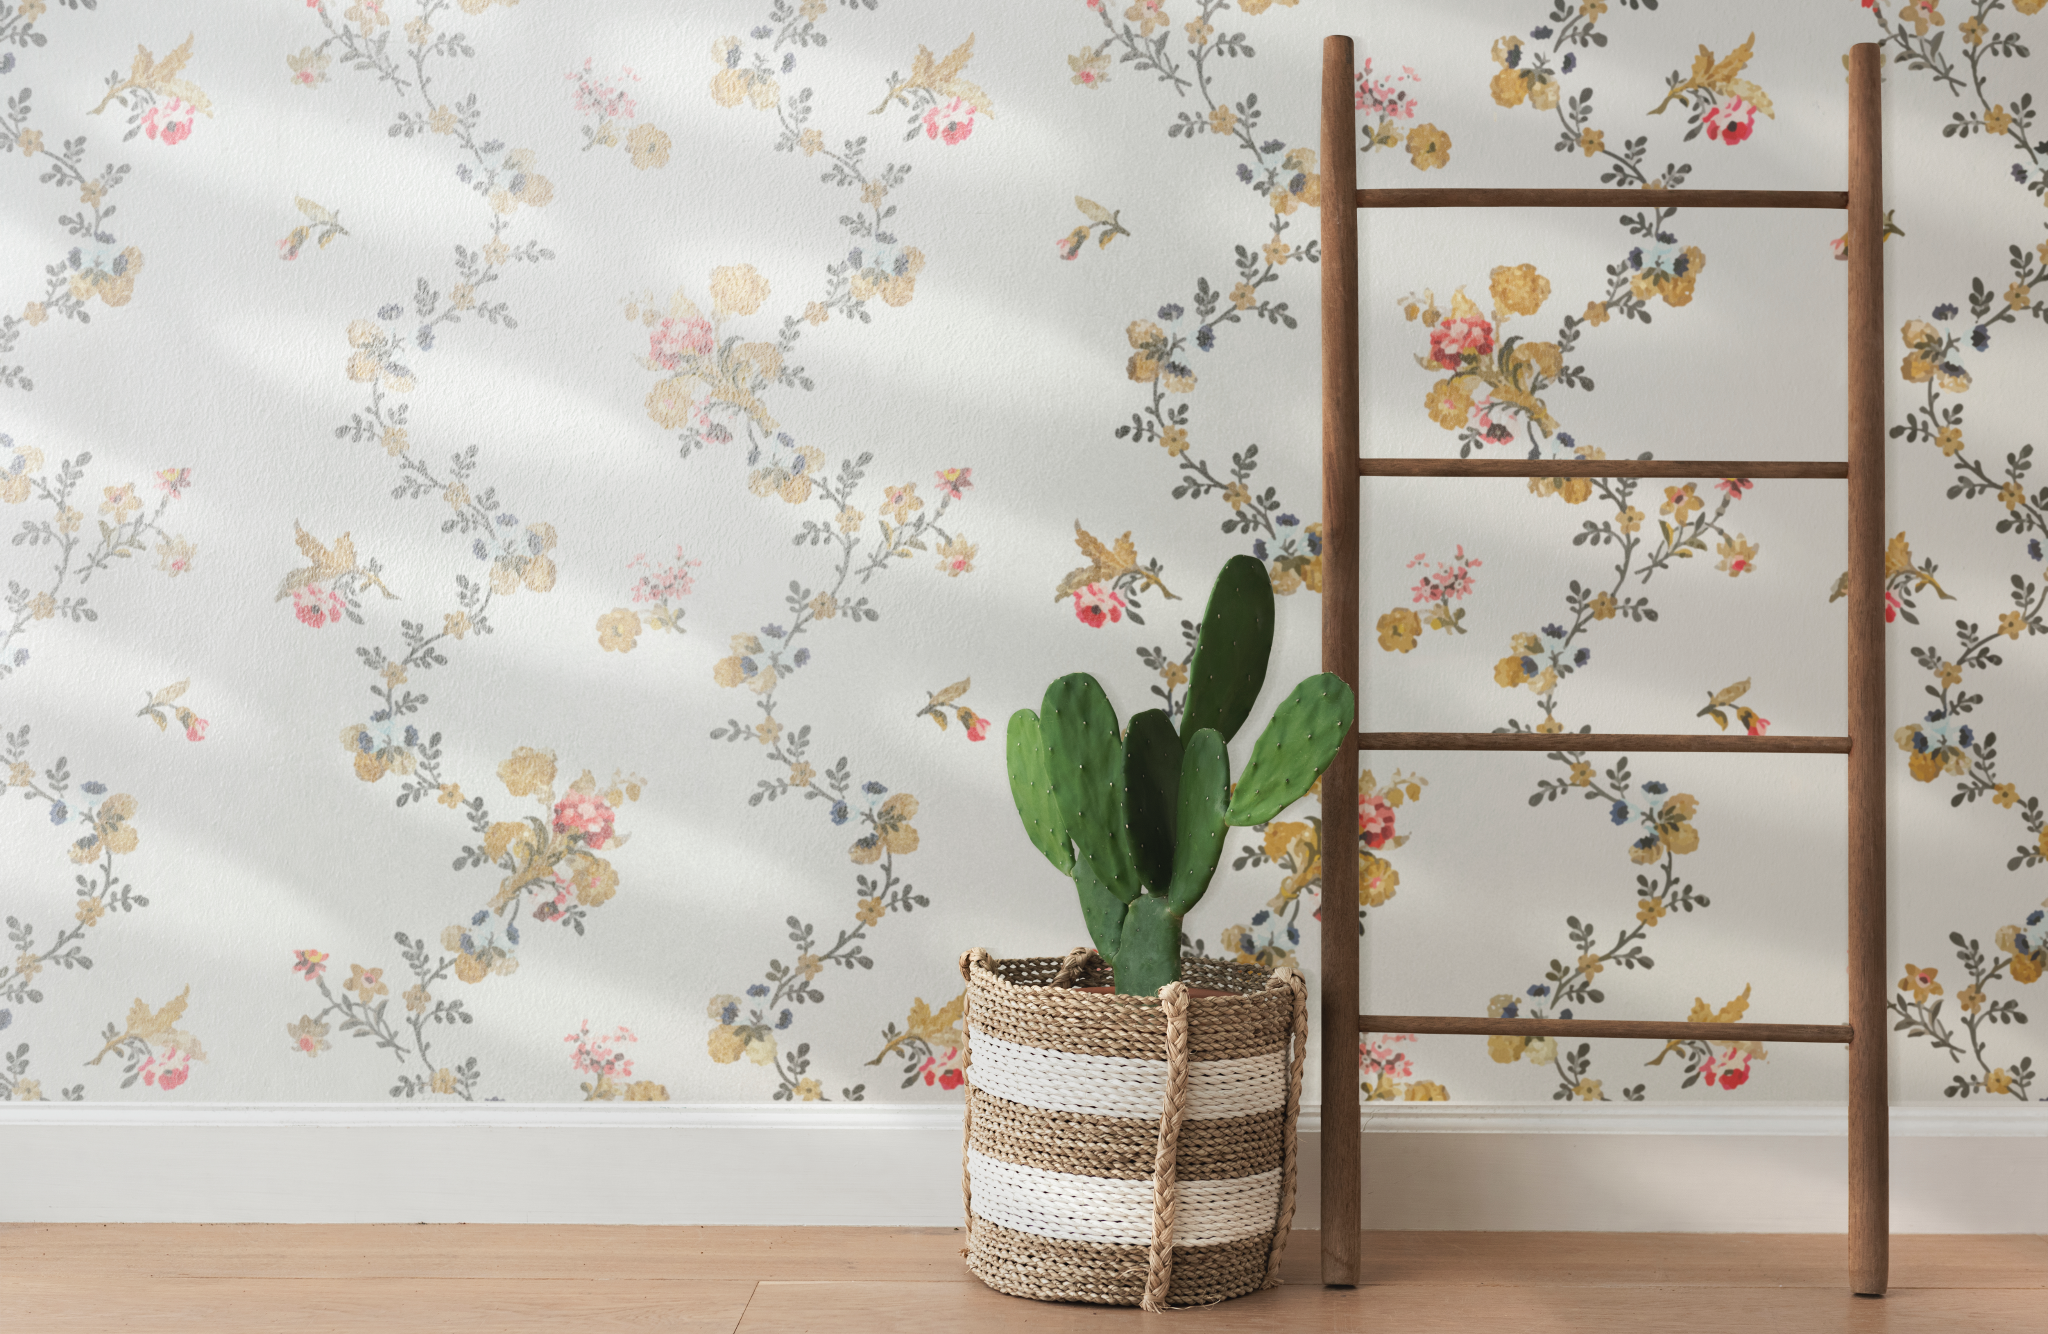 Wall with wallpaper